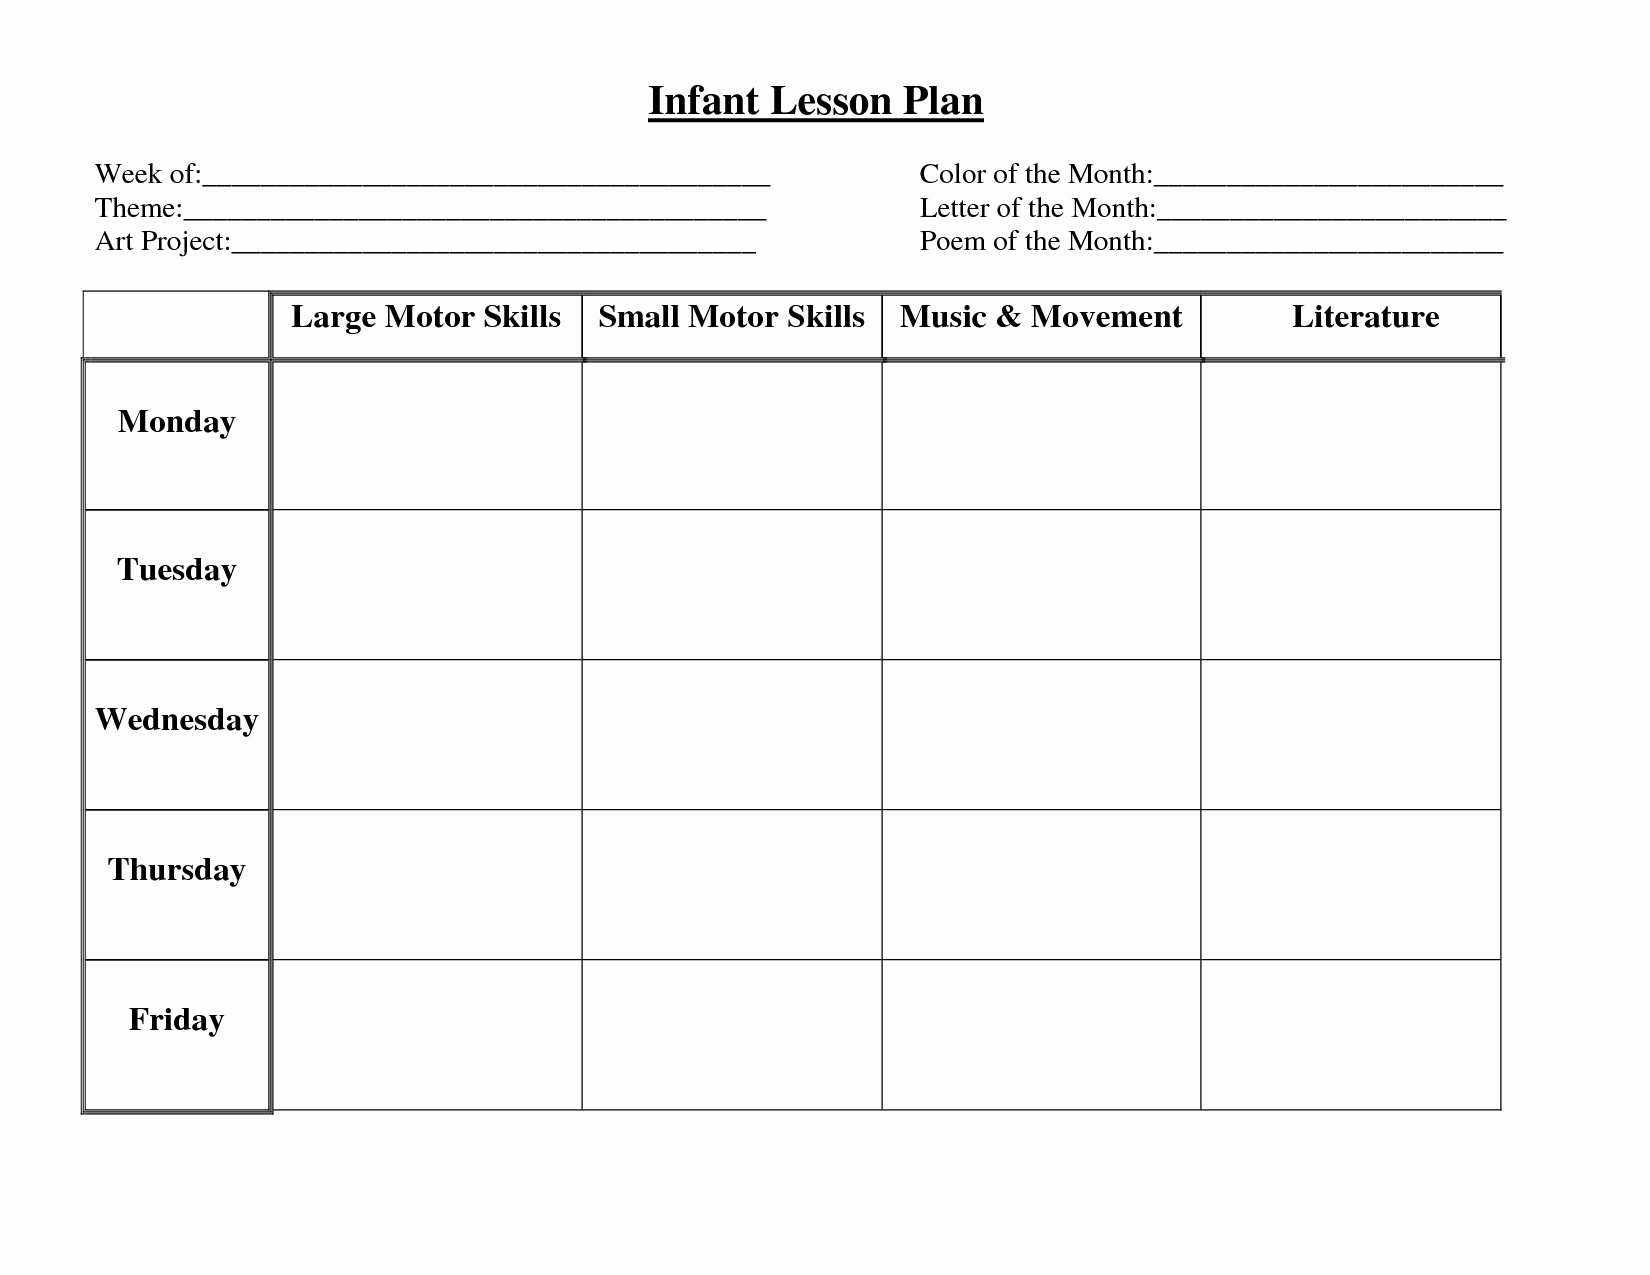 Weekly Lesson Plans for Infants Beautiful Infant Blank Lesson Plan Sheets